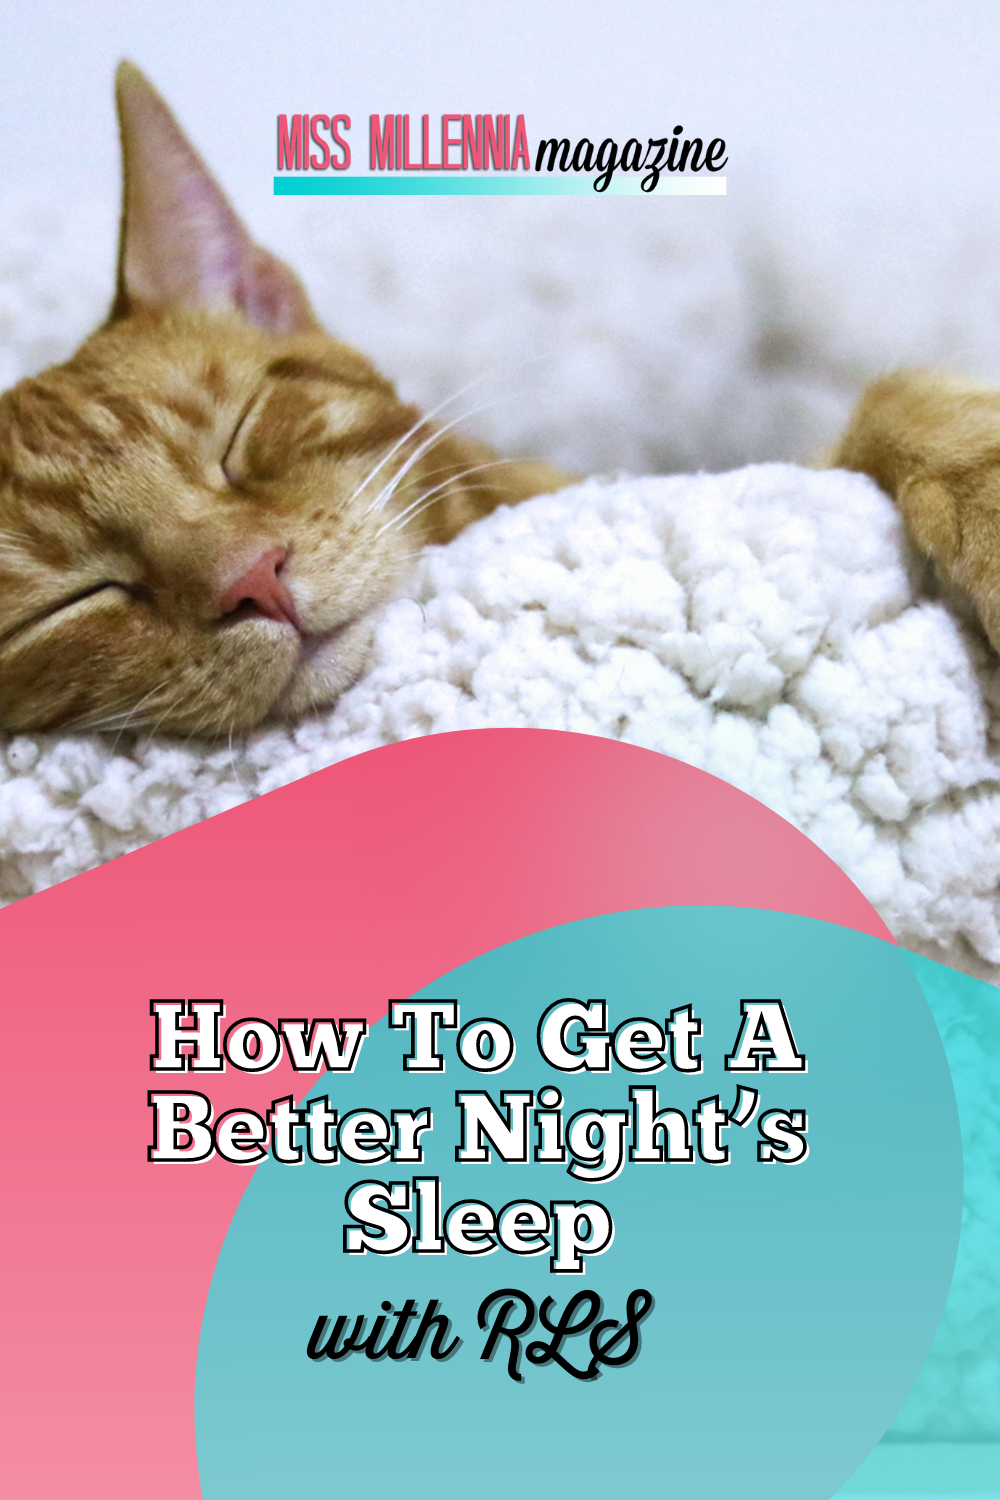 How To Get A Better Night’s Sleep with RLS